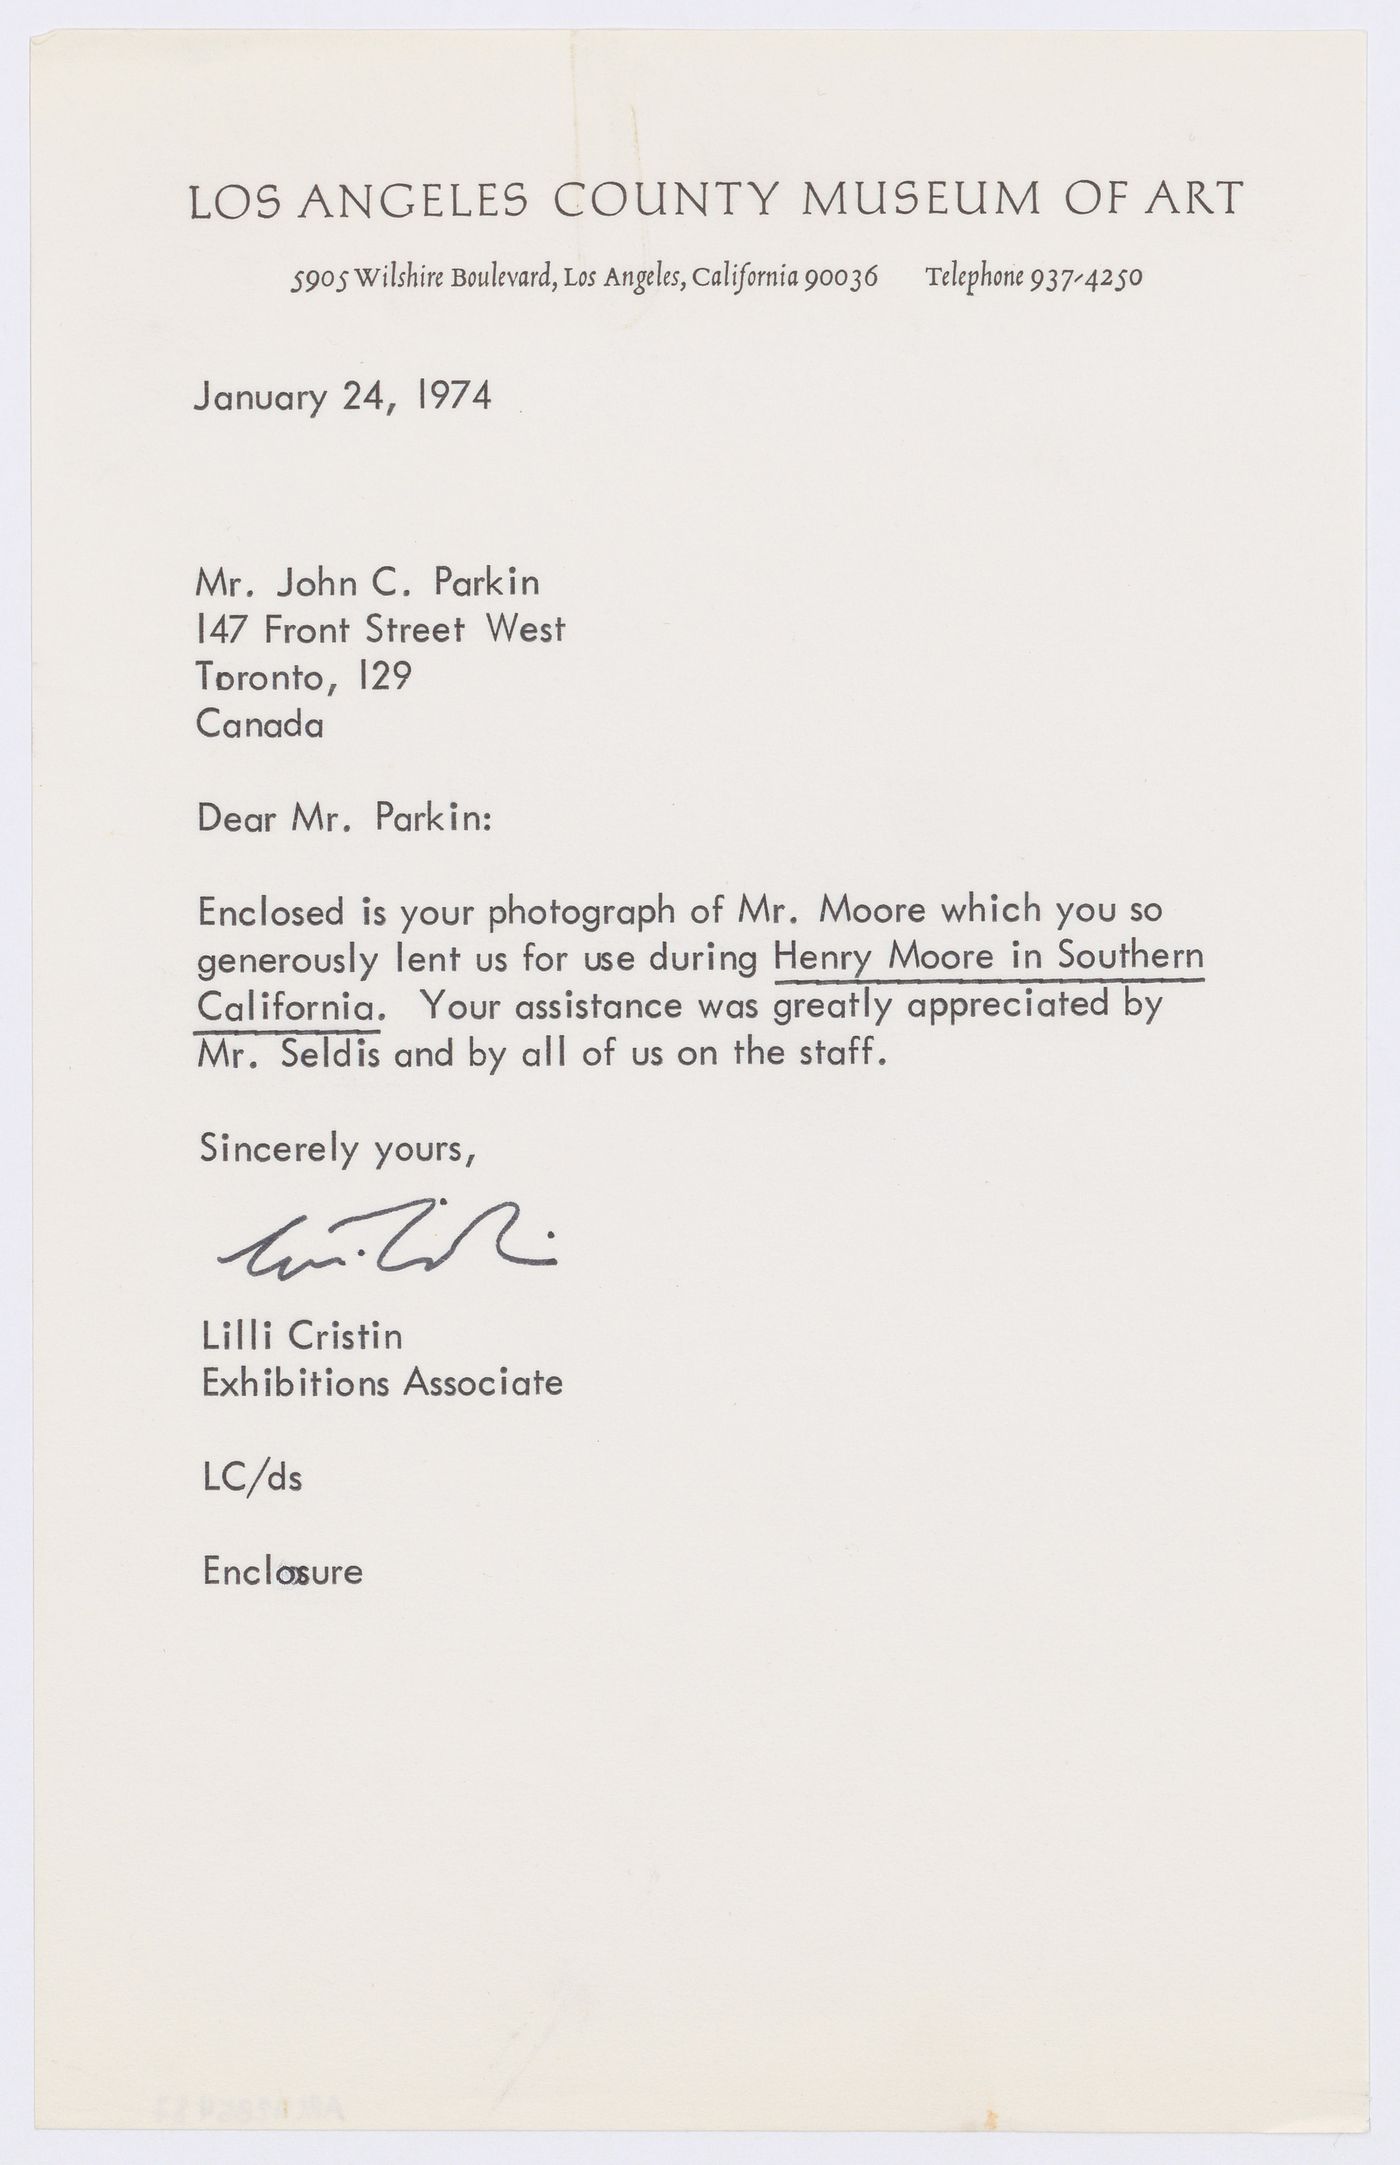 Letter from Los Angeles County Museum of Art to John C. Parkin regarding the lent photograph of Henry Moore presentating the Royal Canadian academy medal